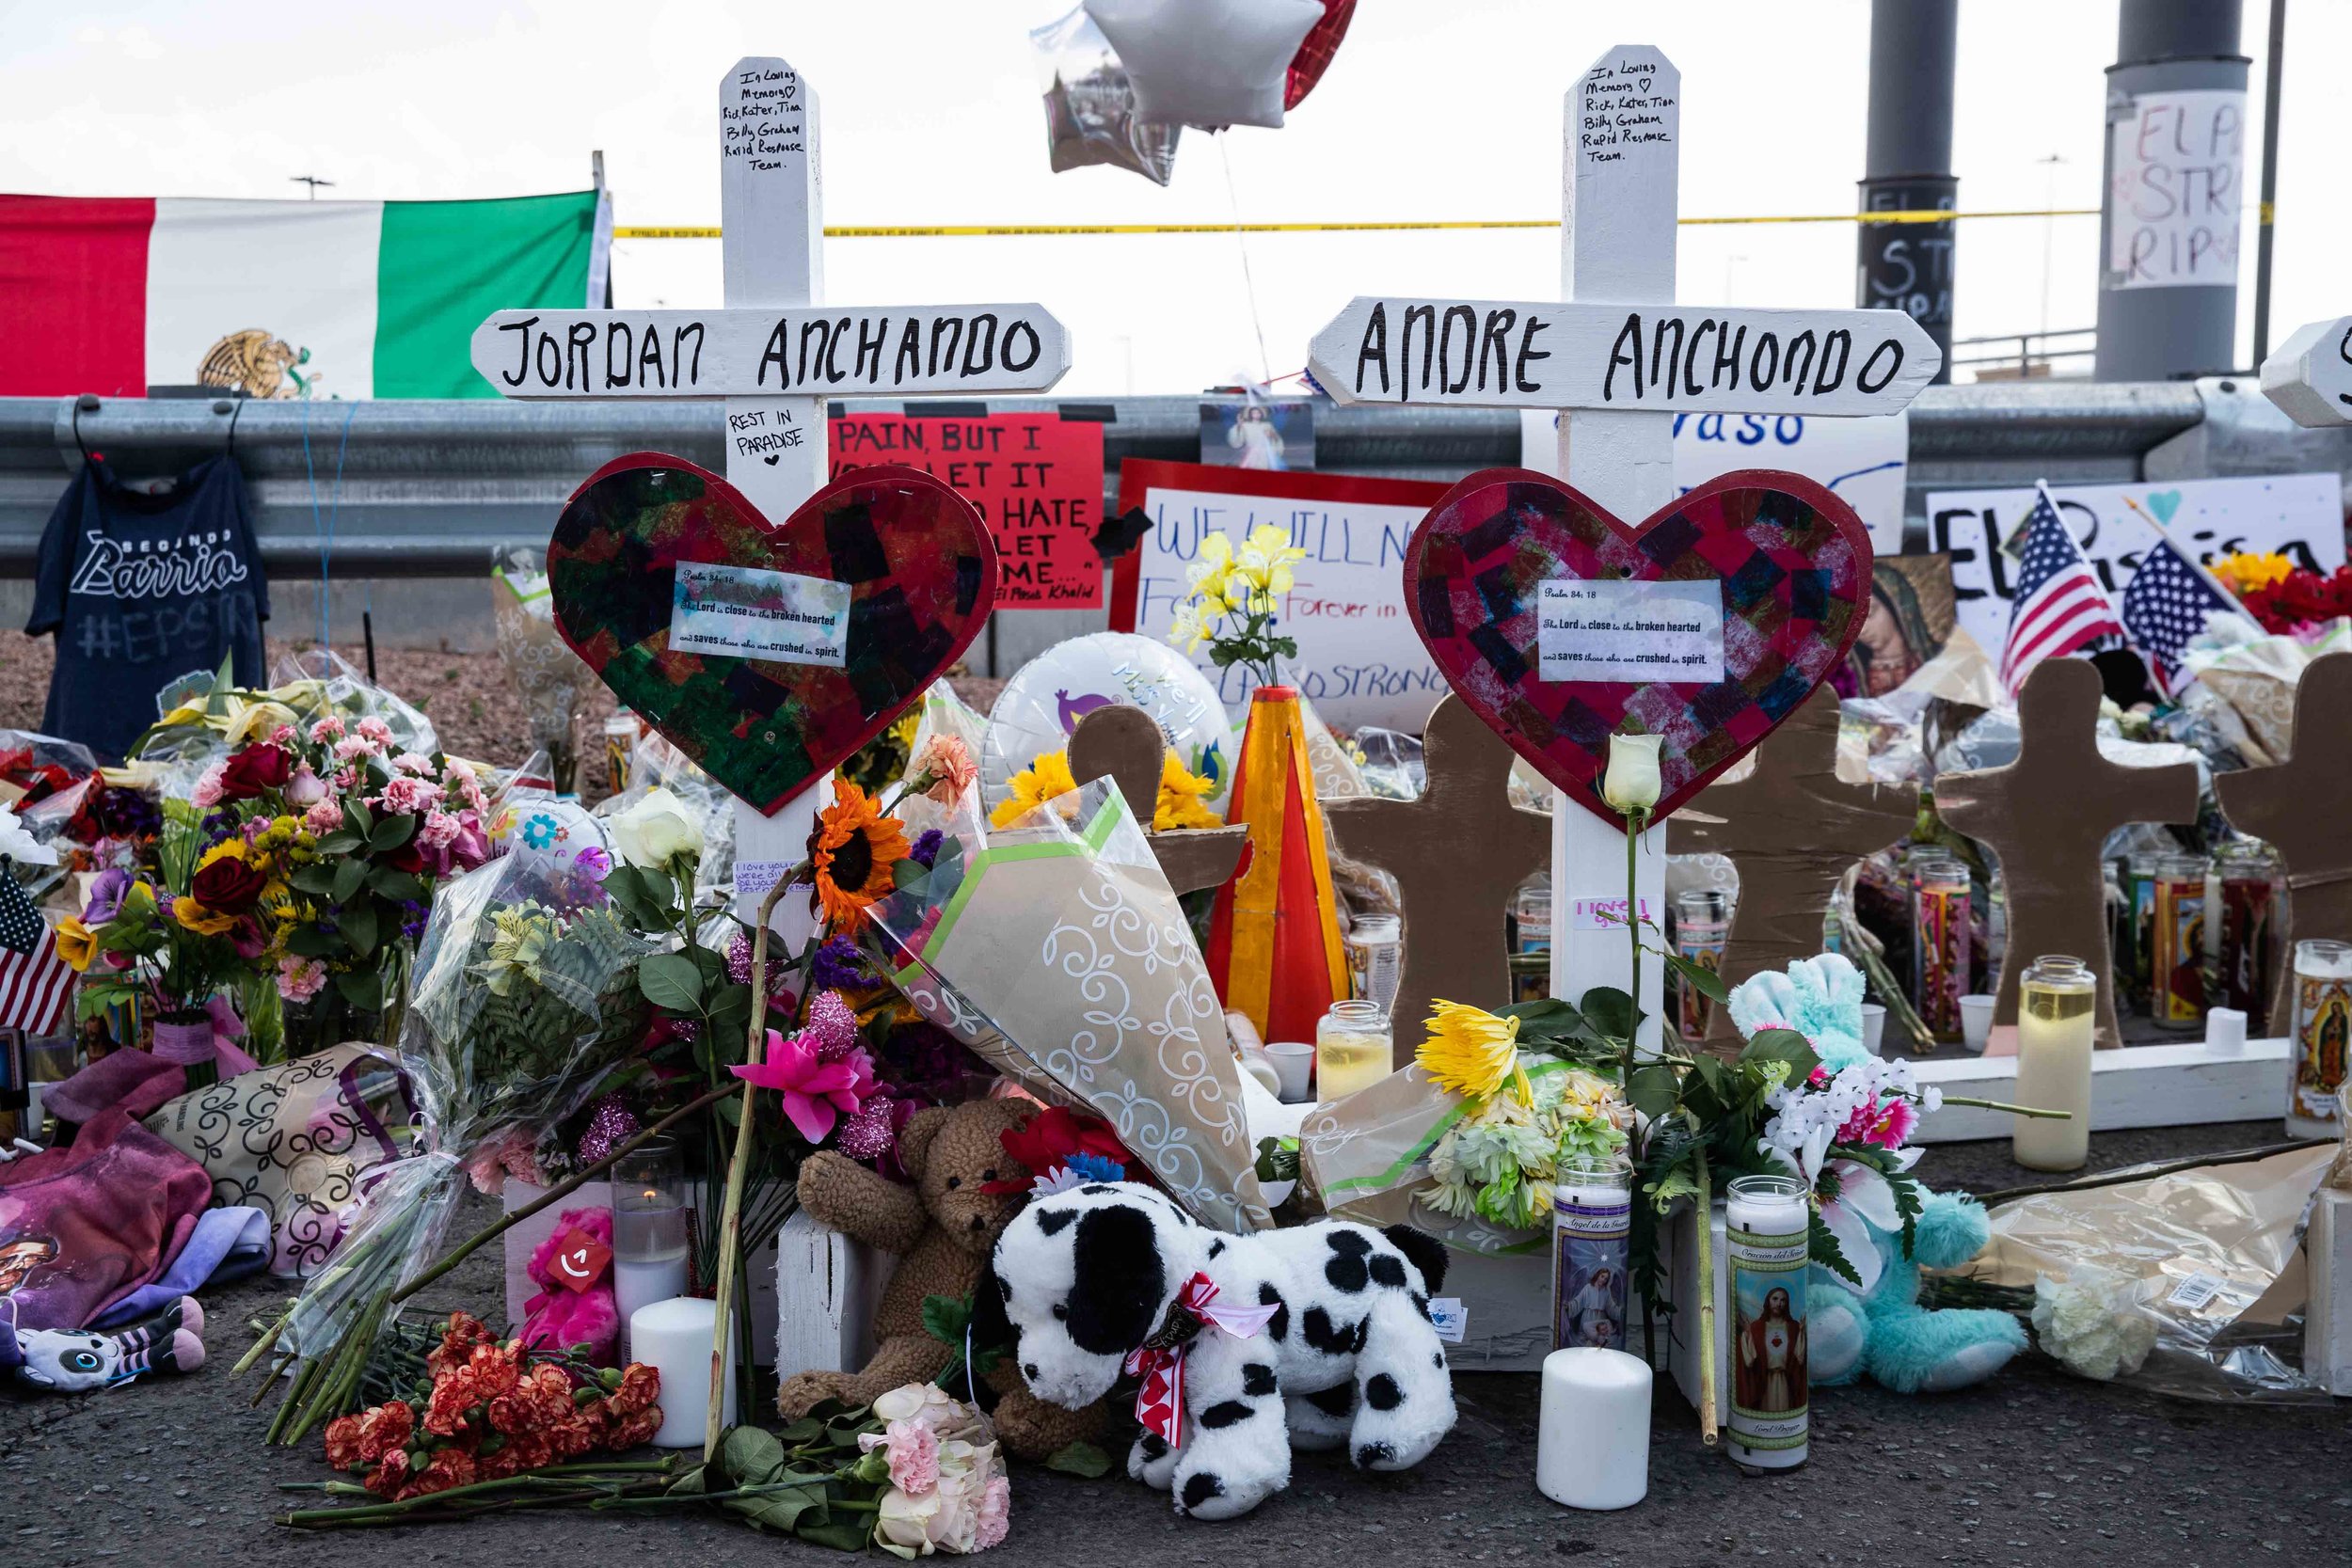  Crosses with the Andre and Jordan Anchondo, victims of the mass shooting occurred in Walmart last Saturday morning, have been placed on the scene to honor their memory in El Paso on Monday, August 5, 2019. 